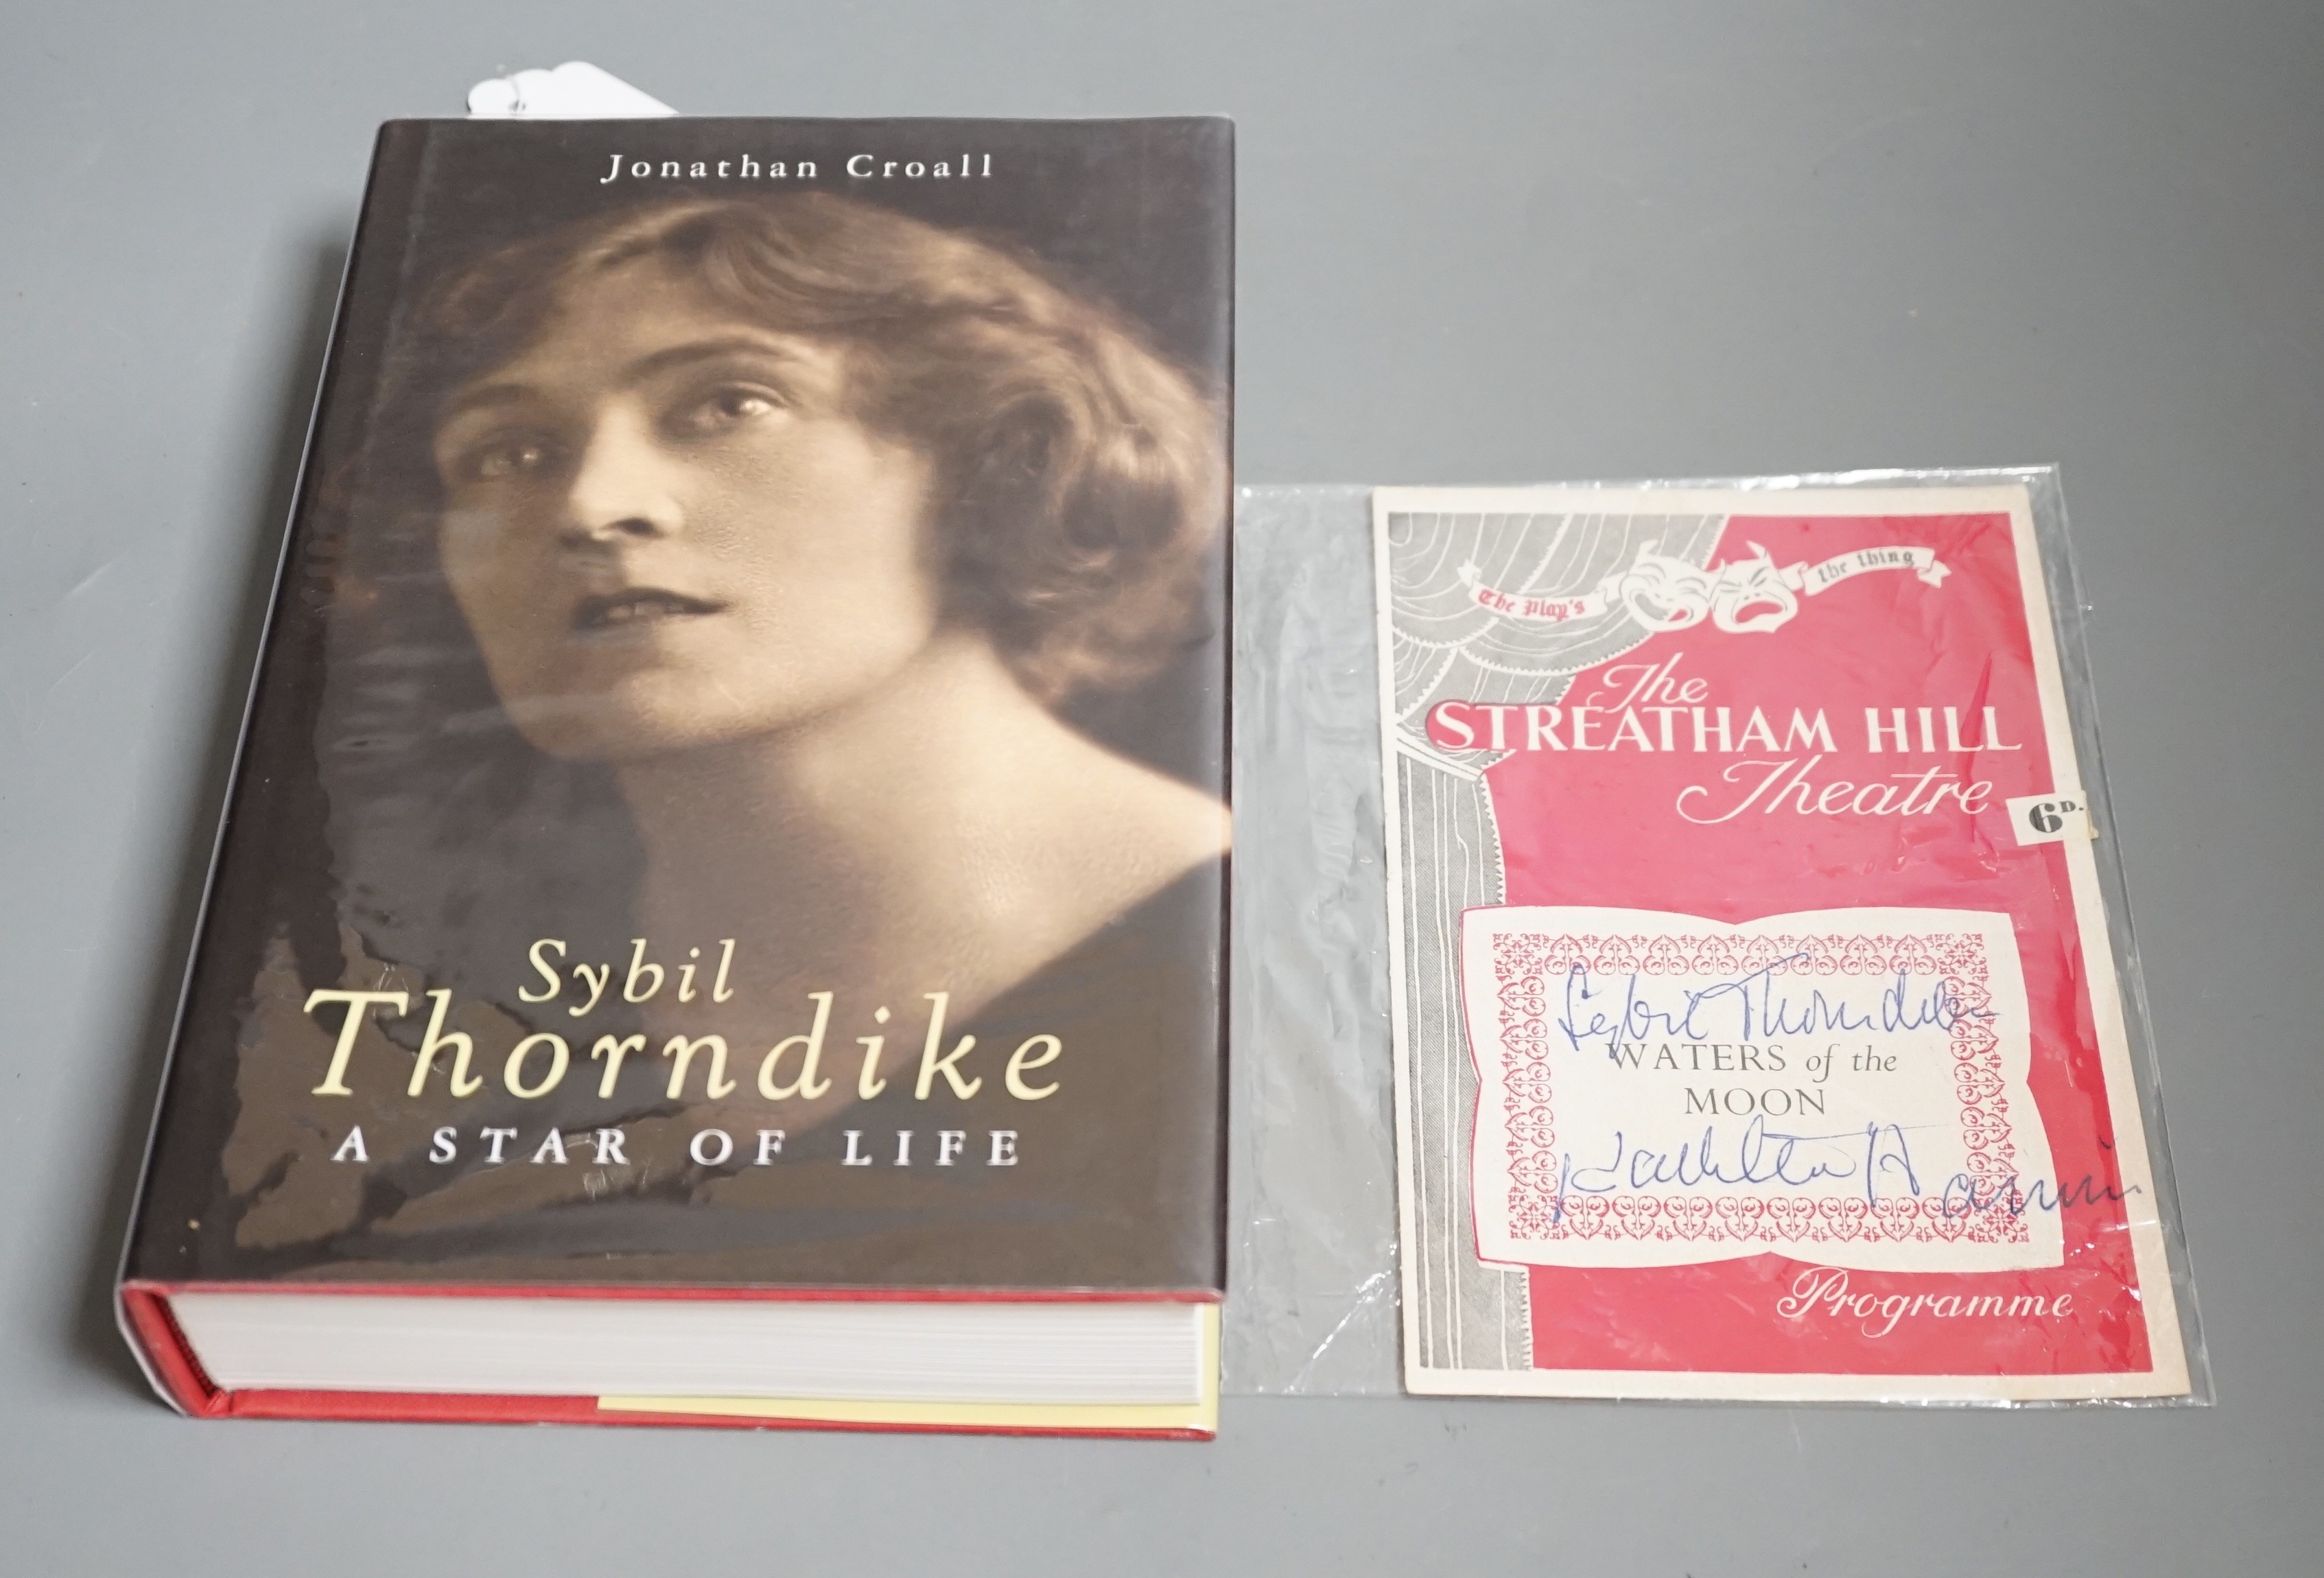 The Streatham Hill theatre programme for Waters of the Moon, signed by Sybil Thorndike and a biography Croall Jonathan, Sybil Thorndike, A star of life